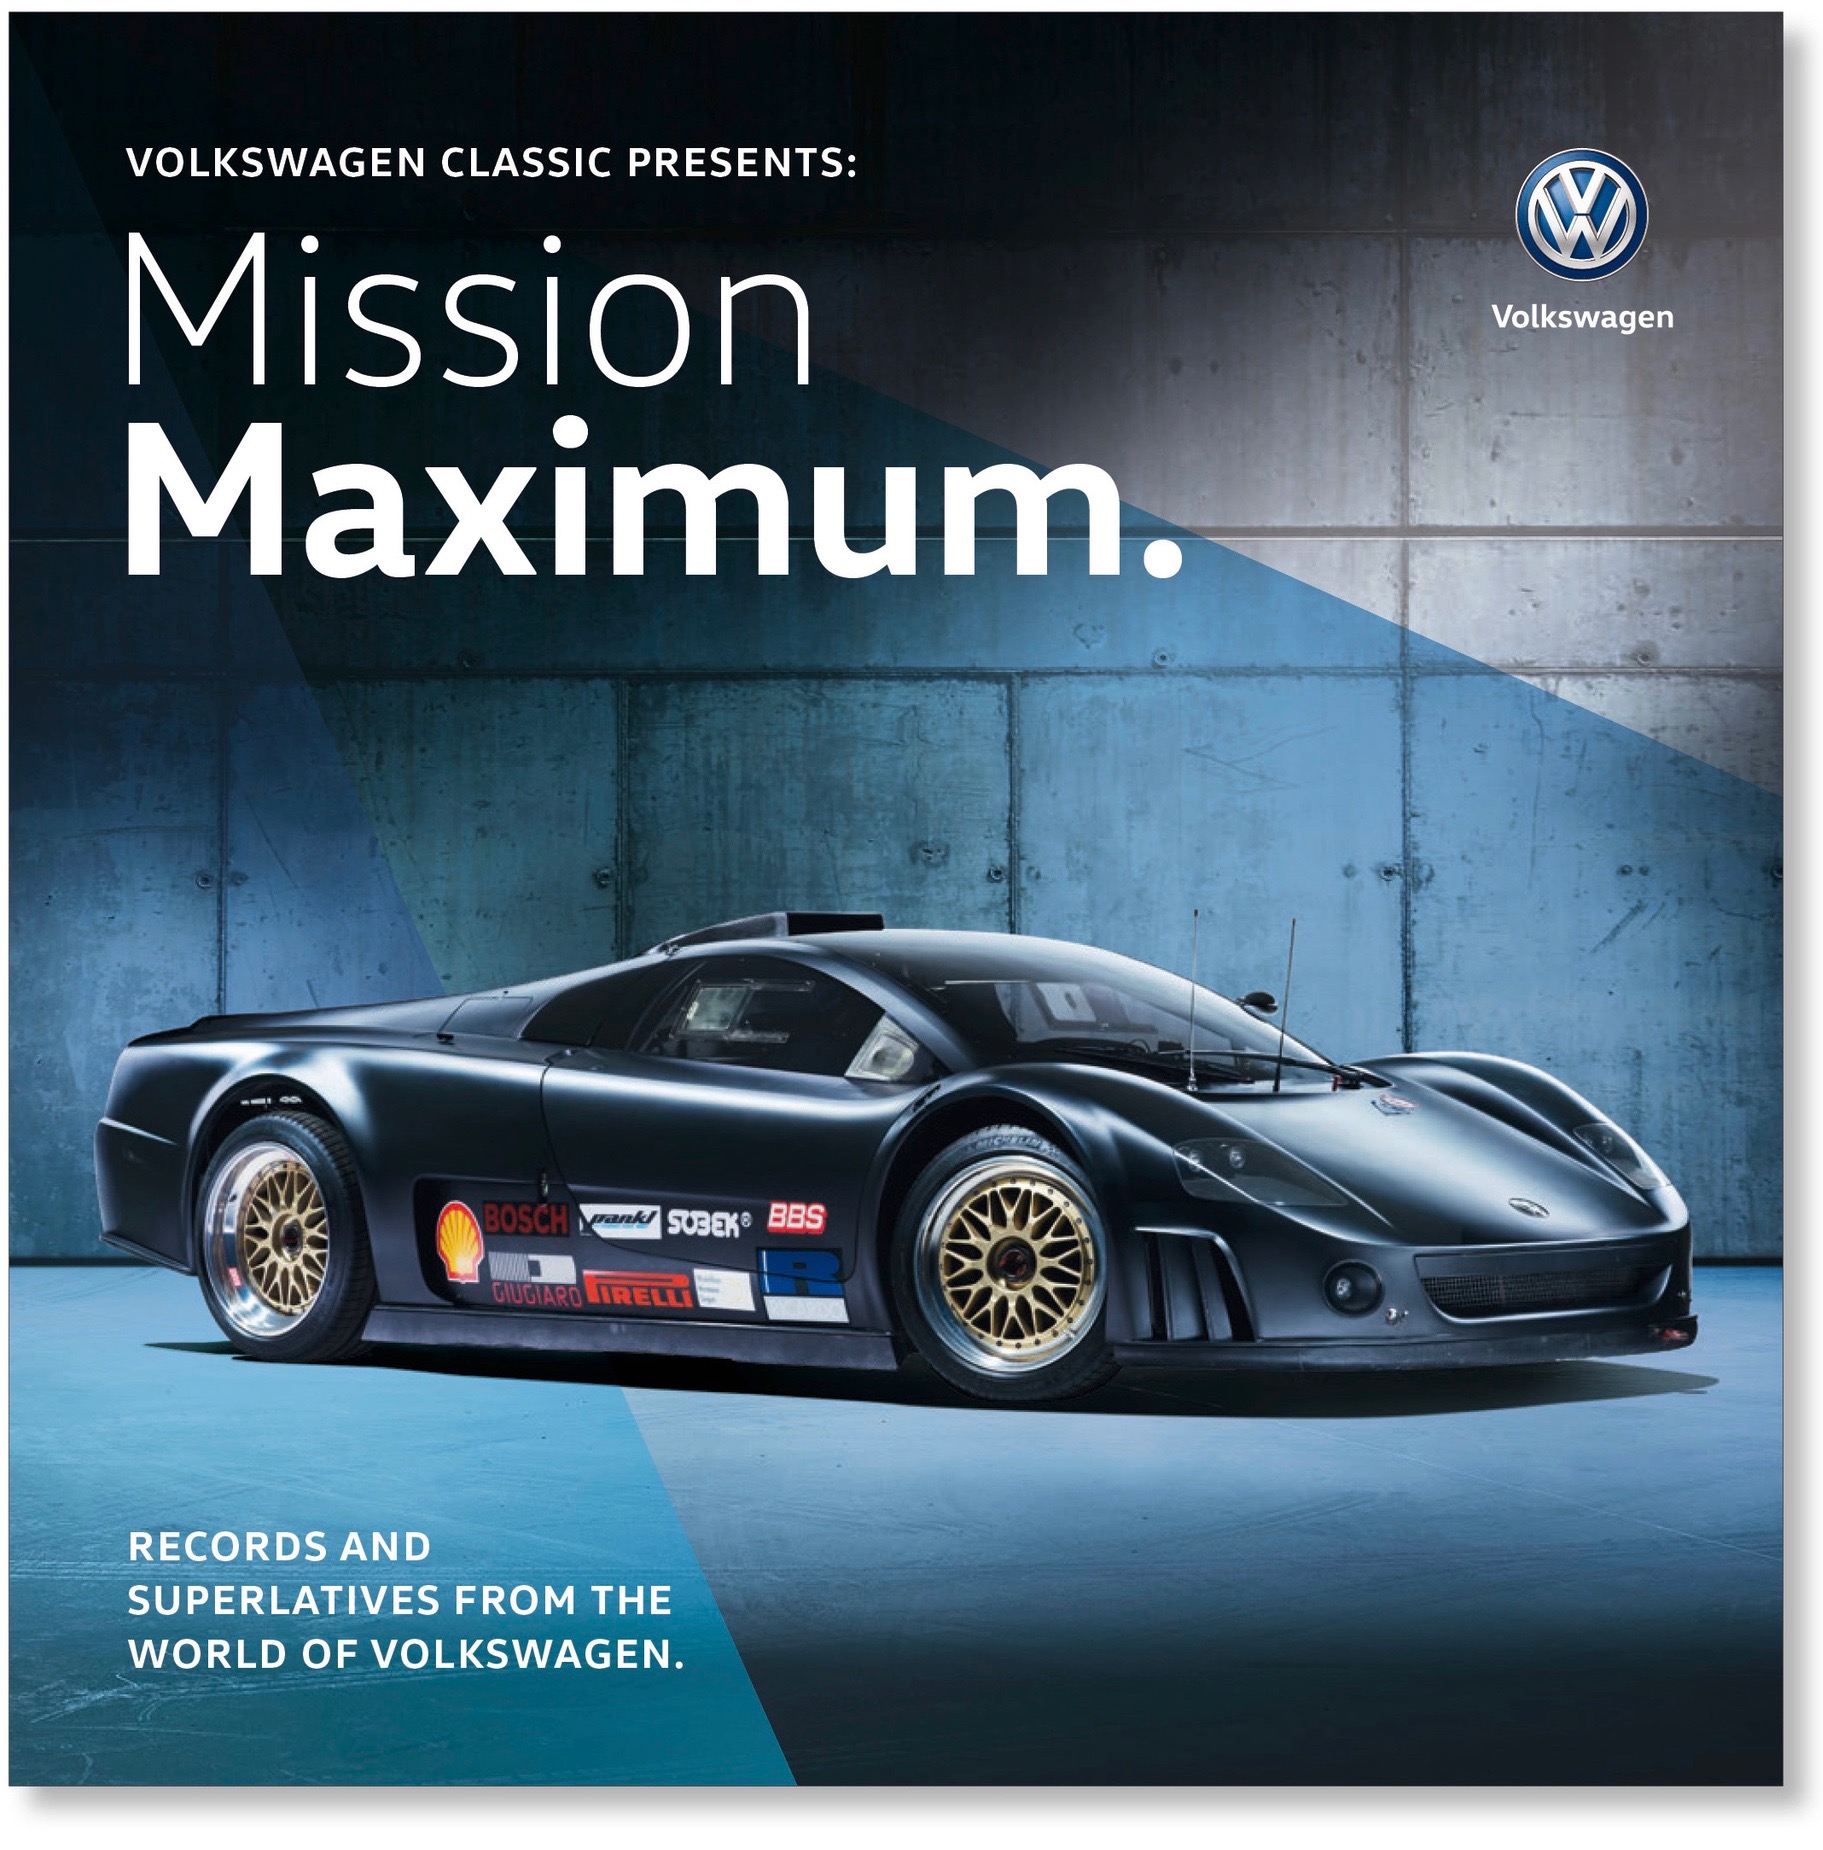 Volkswagen, VW shares accomplishments in 68-page book you can download, ClassicCars.com Journal